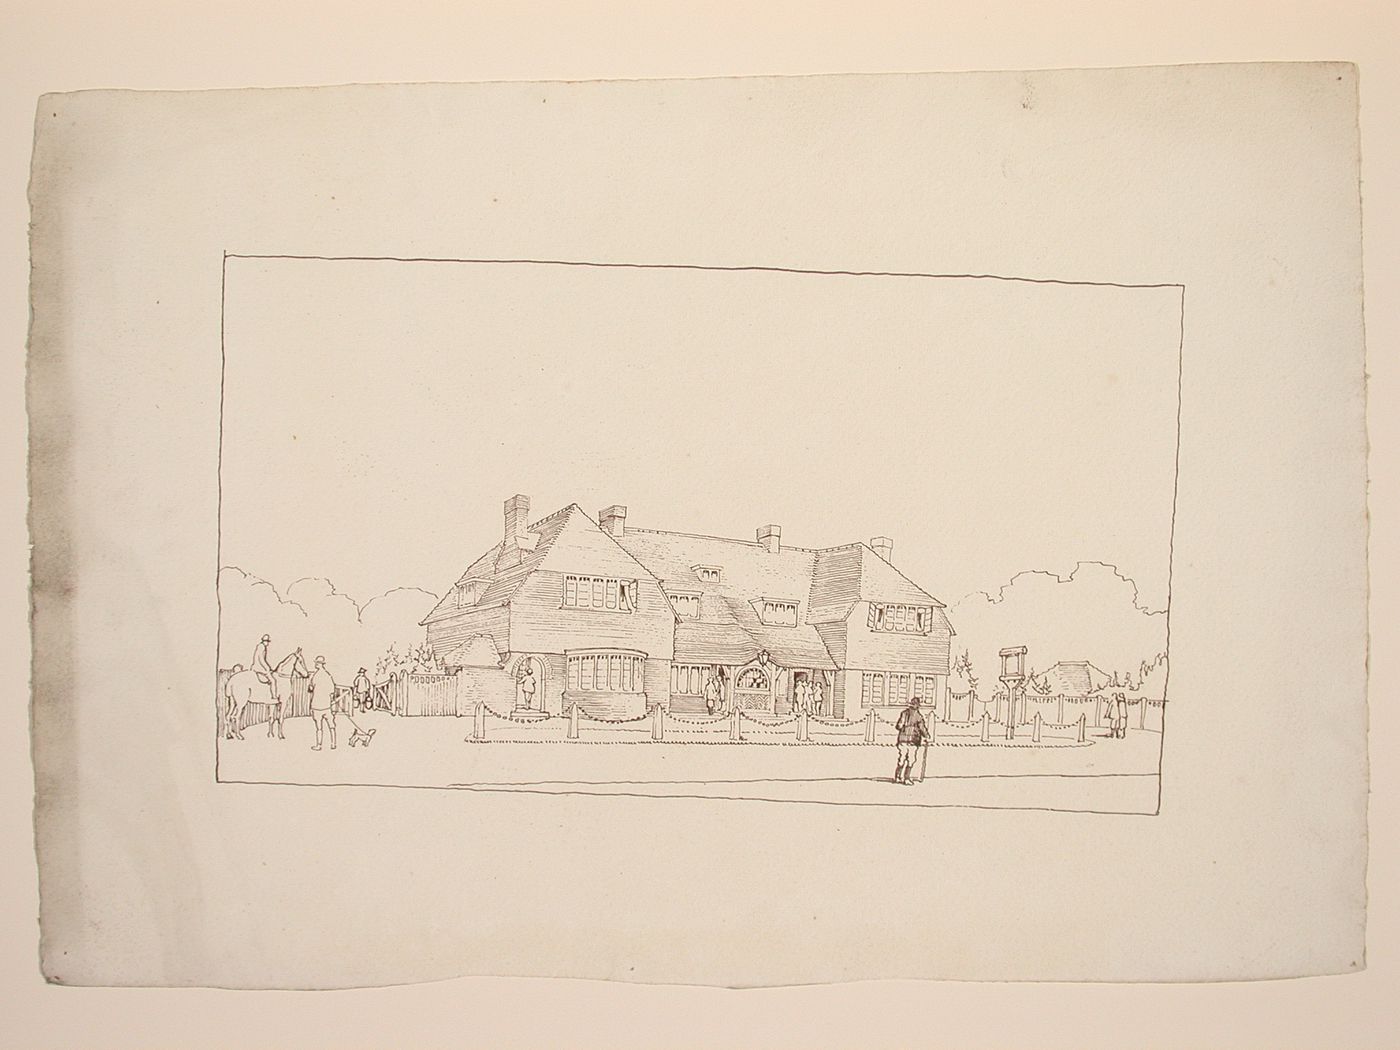 Perspectival view showing a large building set in the countryside, possibly a clubhouse